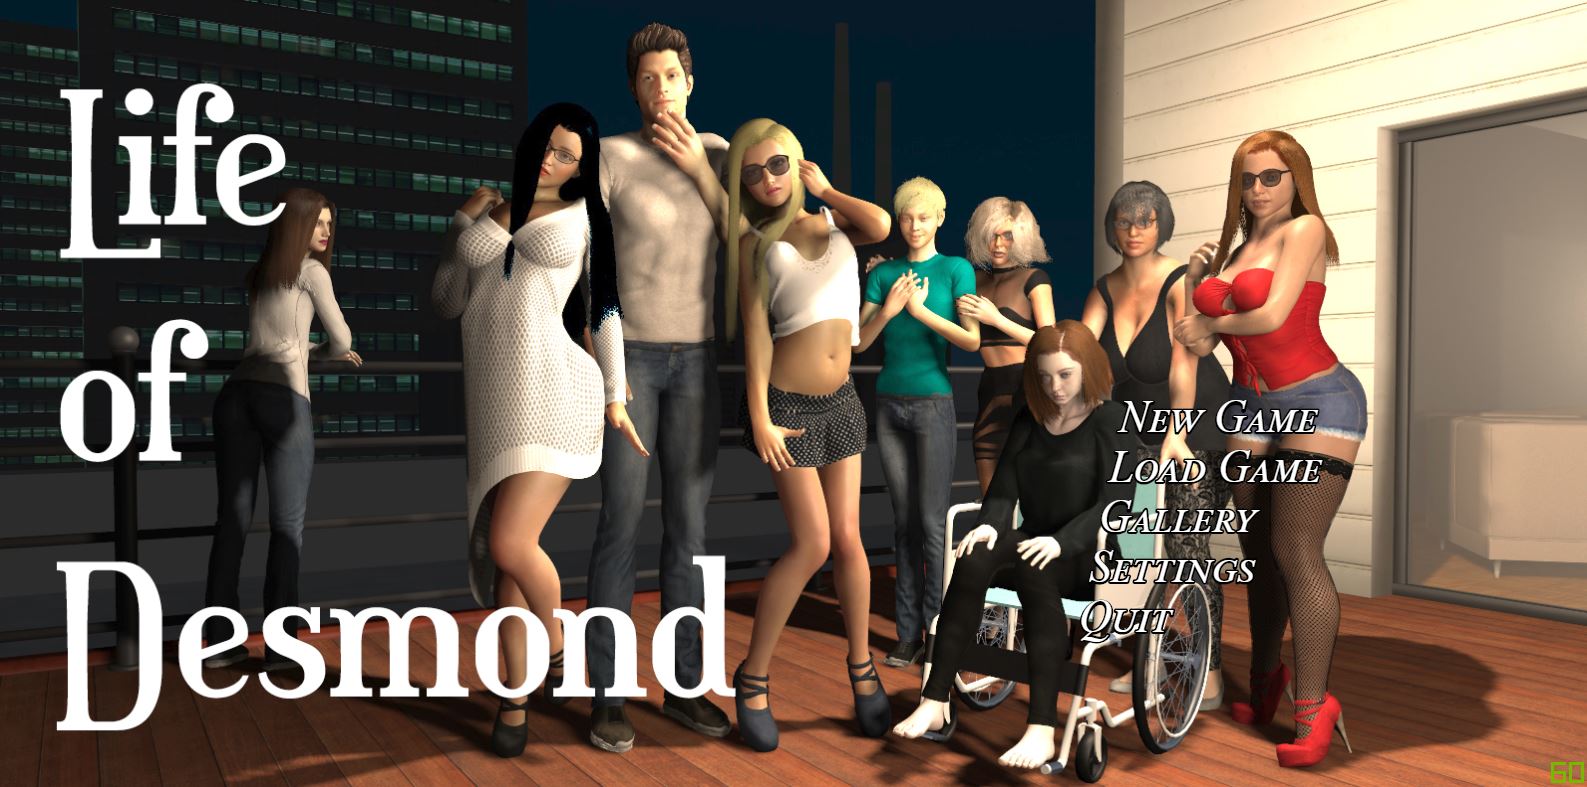 Life of Desmond porn xxx game download cover